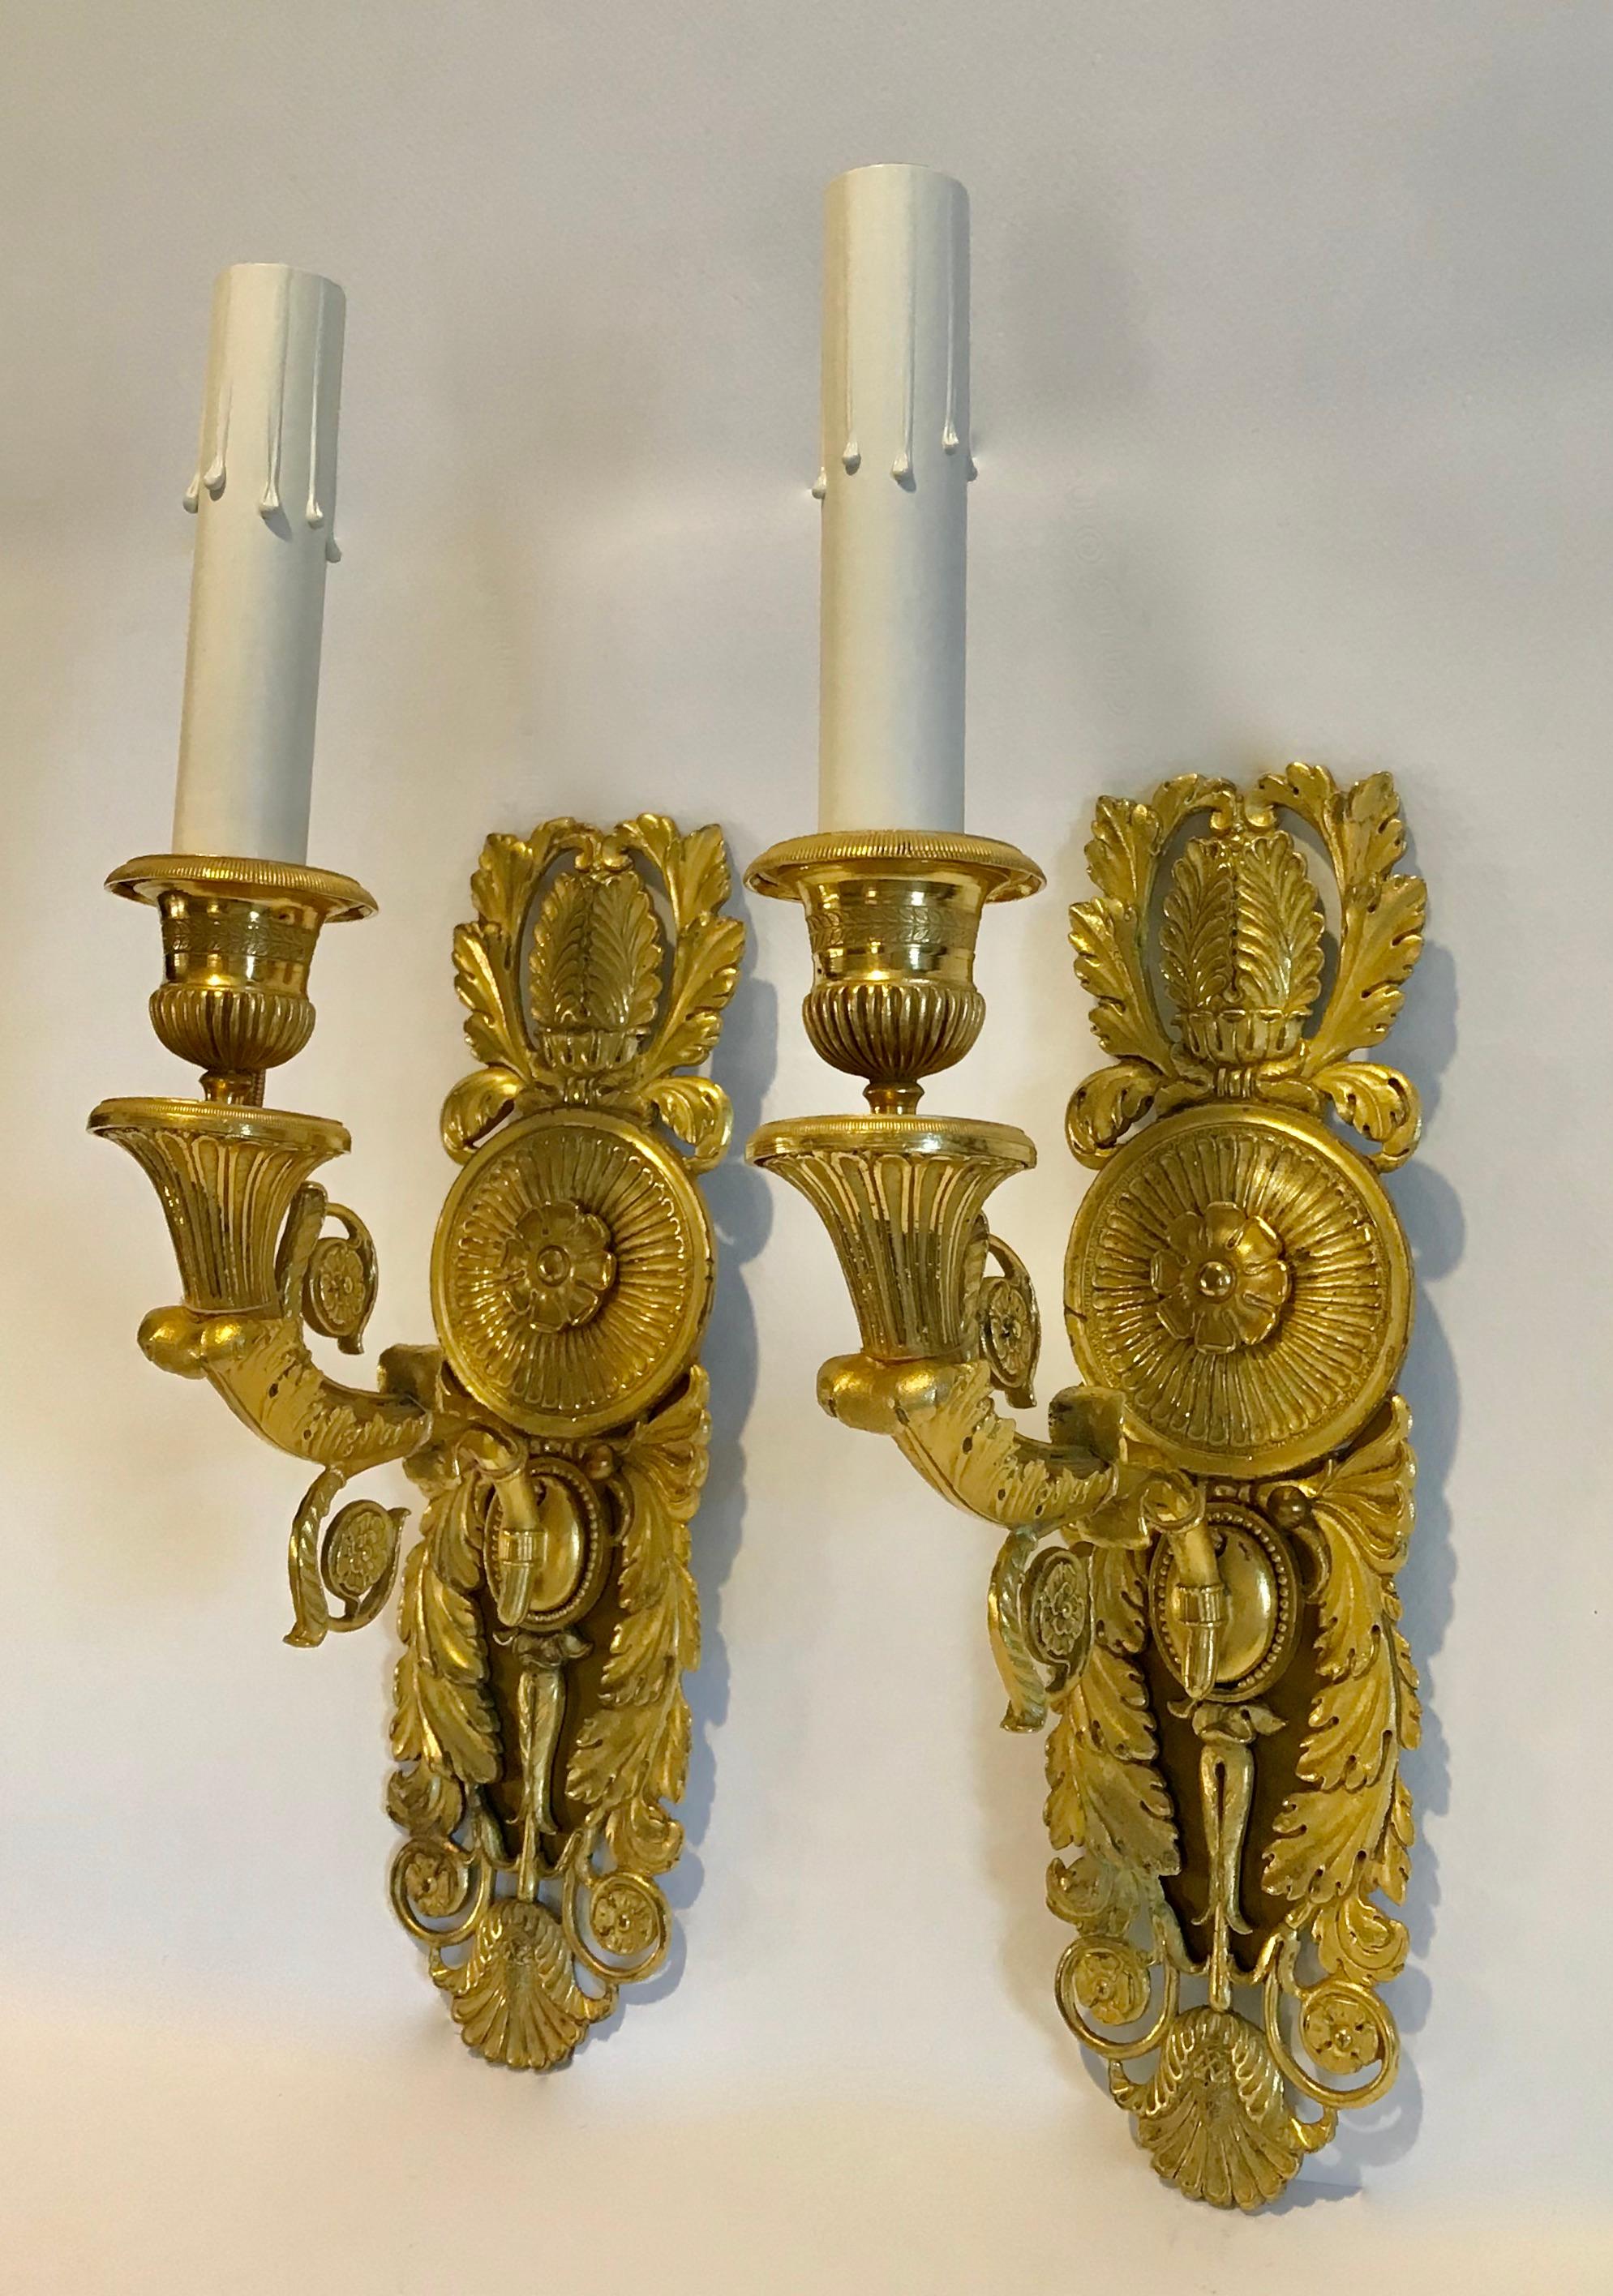 Pair of dore gilt bronze French Empire style single arm wall sconces. Exceptionally well chased and detailed. Newly wired for US installations with French style rayon covered exterior wiring. Each sconce uses a single 40 watt recommended max 